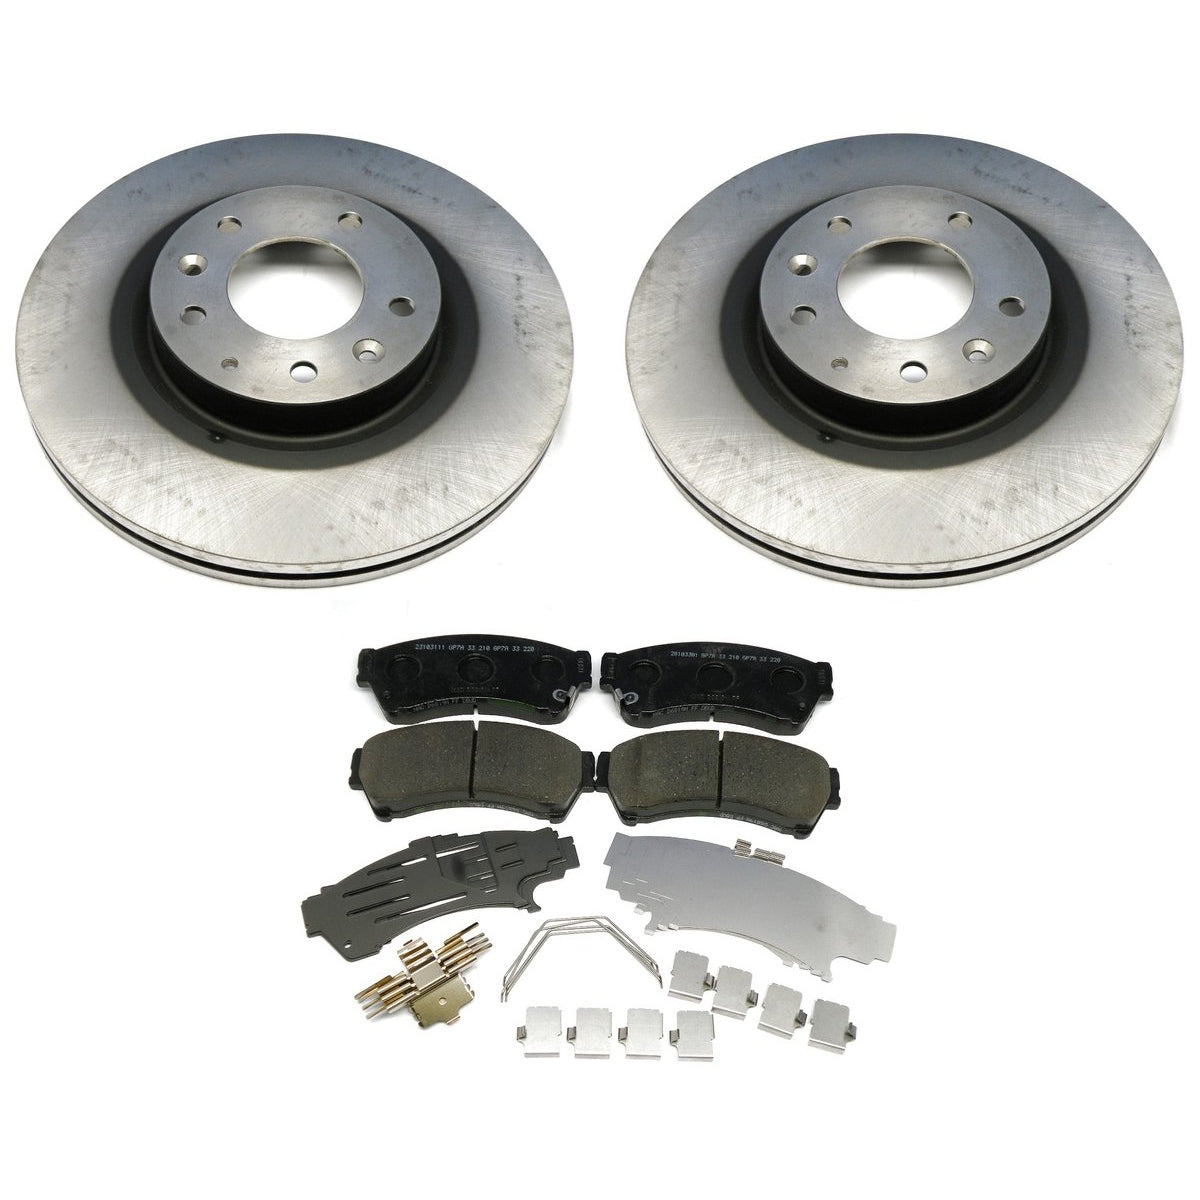 Front Brake Package: Pads, Rotors &amp; Attachment Kit | Mazda6 (2006-2008)